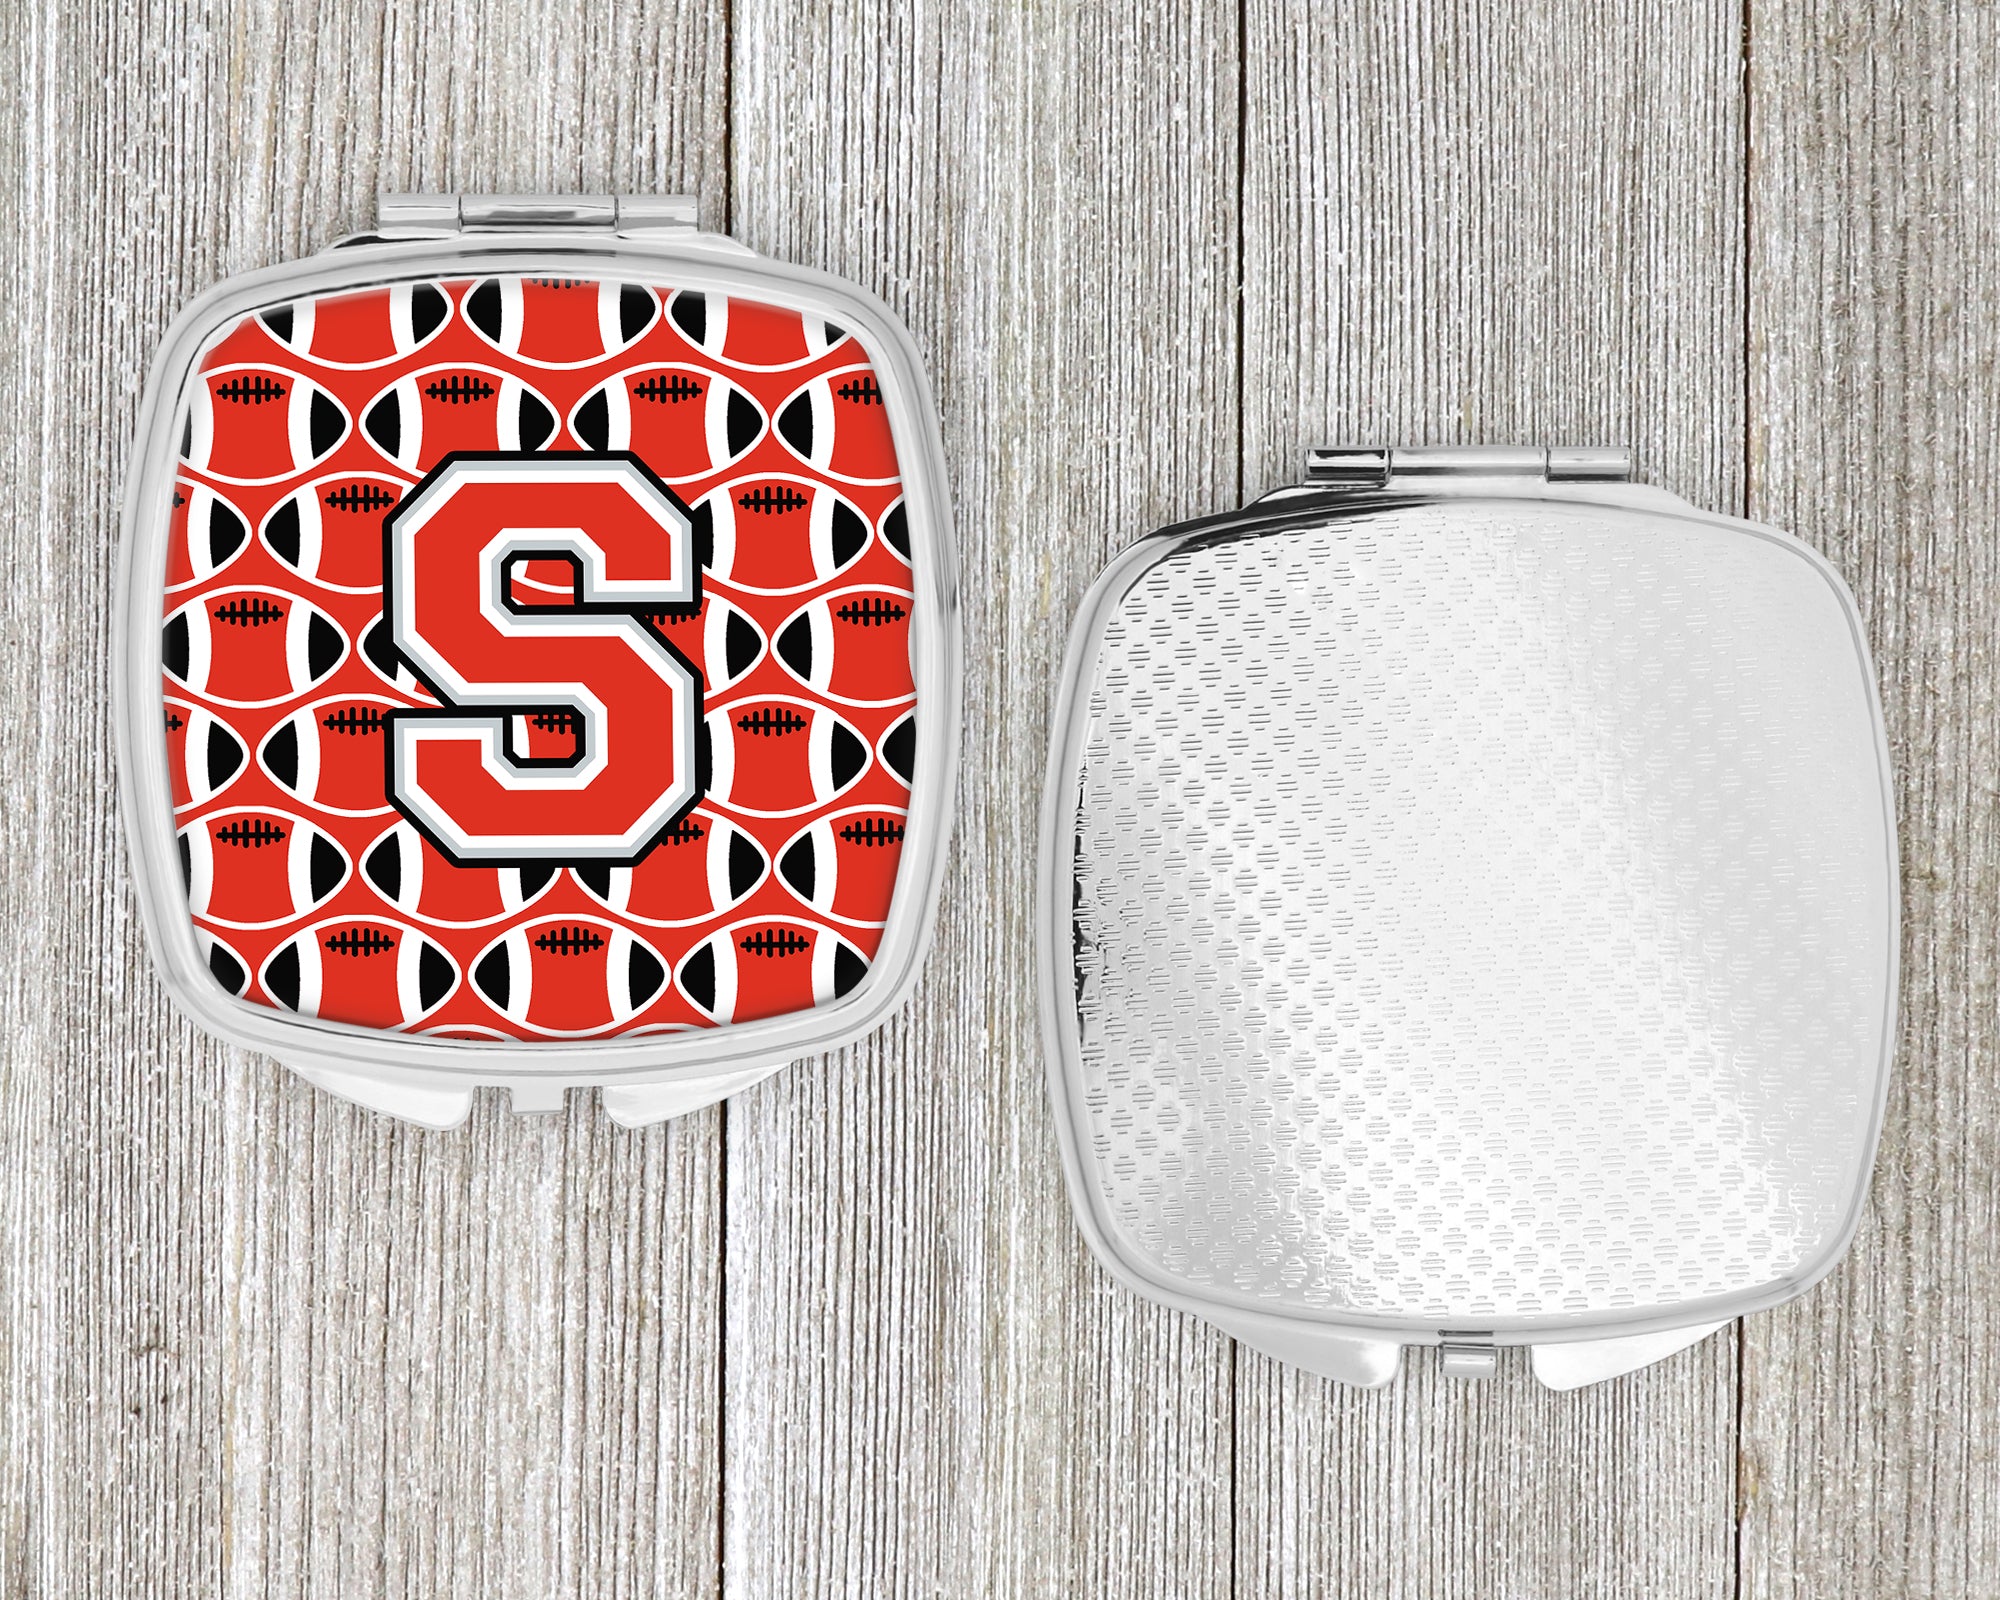 Letter S Football Scarlet and Grey Compact Mirror CJ1067-SSCM